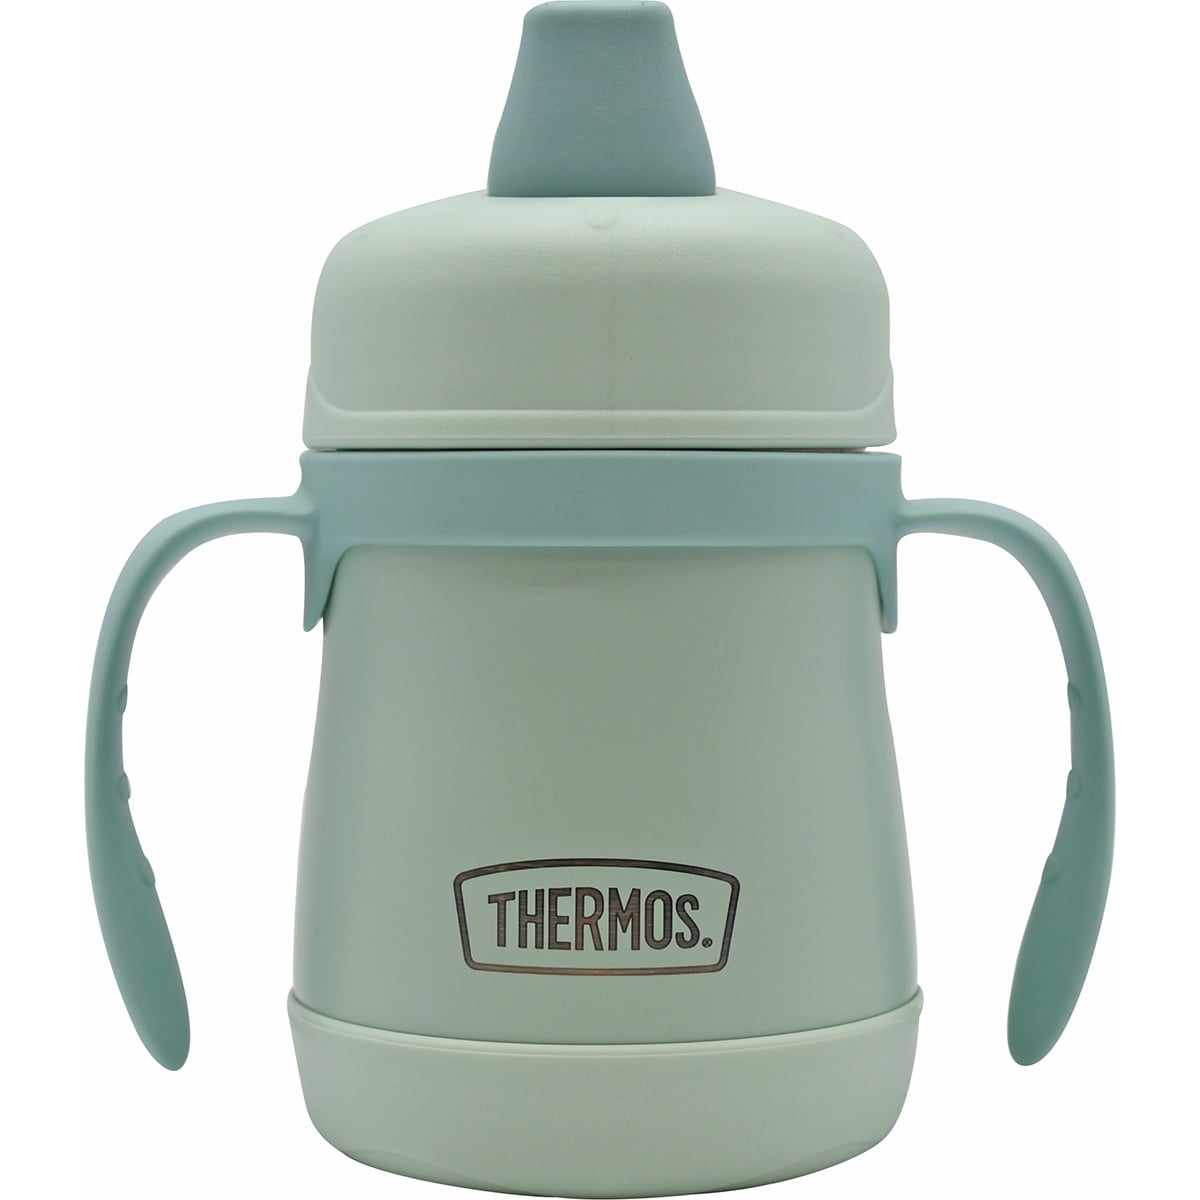 Thermos Baby 7 oz. Vacuum Insulated Stainless Steel Food Jar - Mint